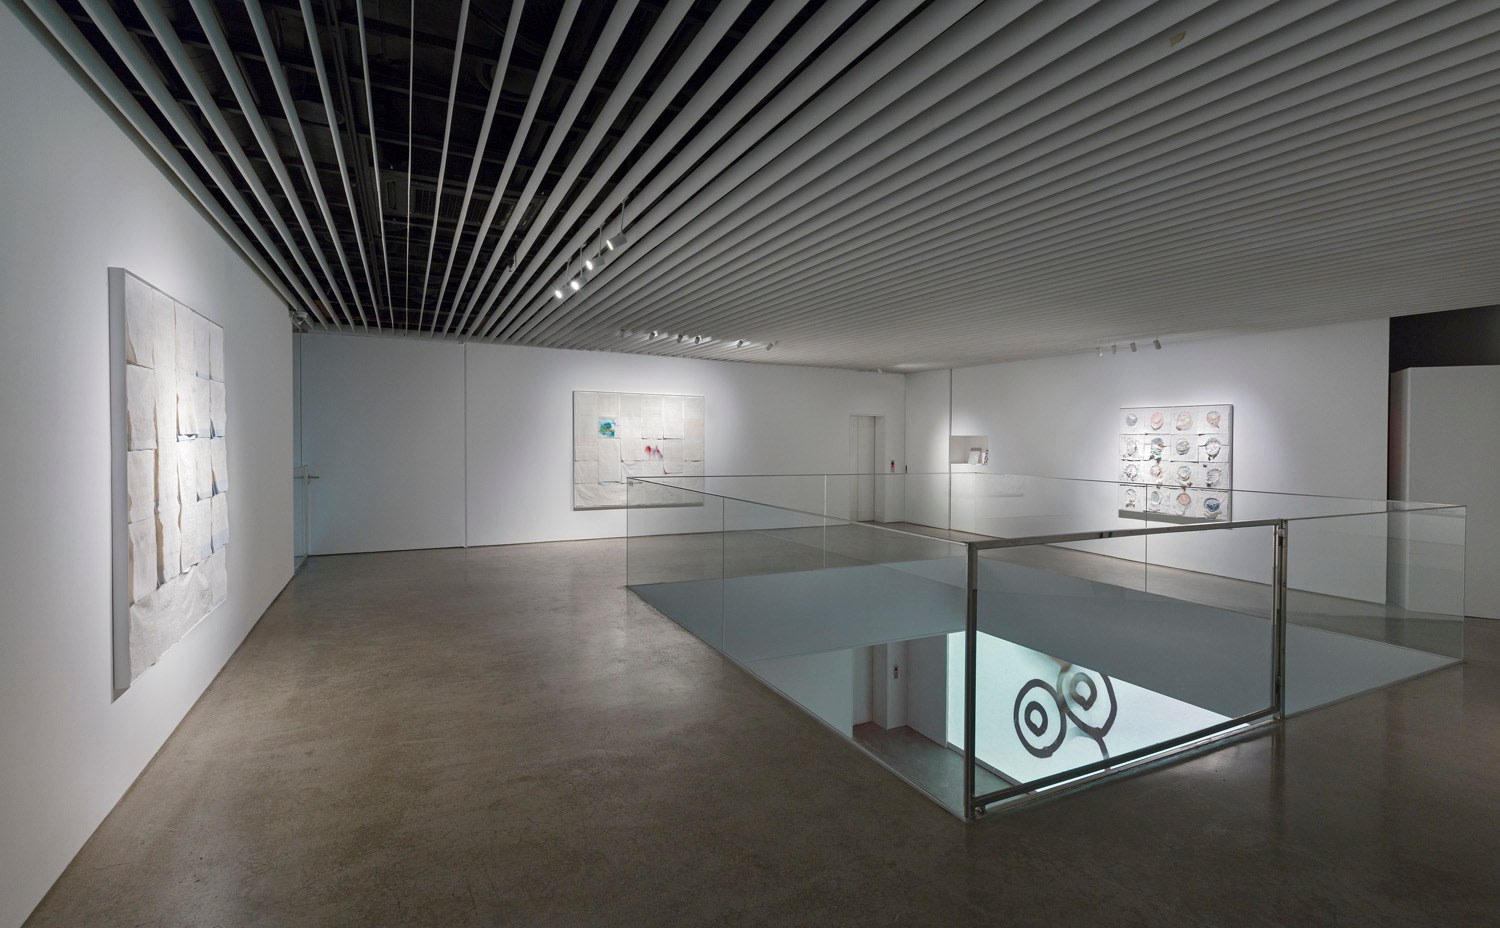 Liza Lou, The River and the Raft, Installation view at Songwon Art Center, Seoul